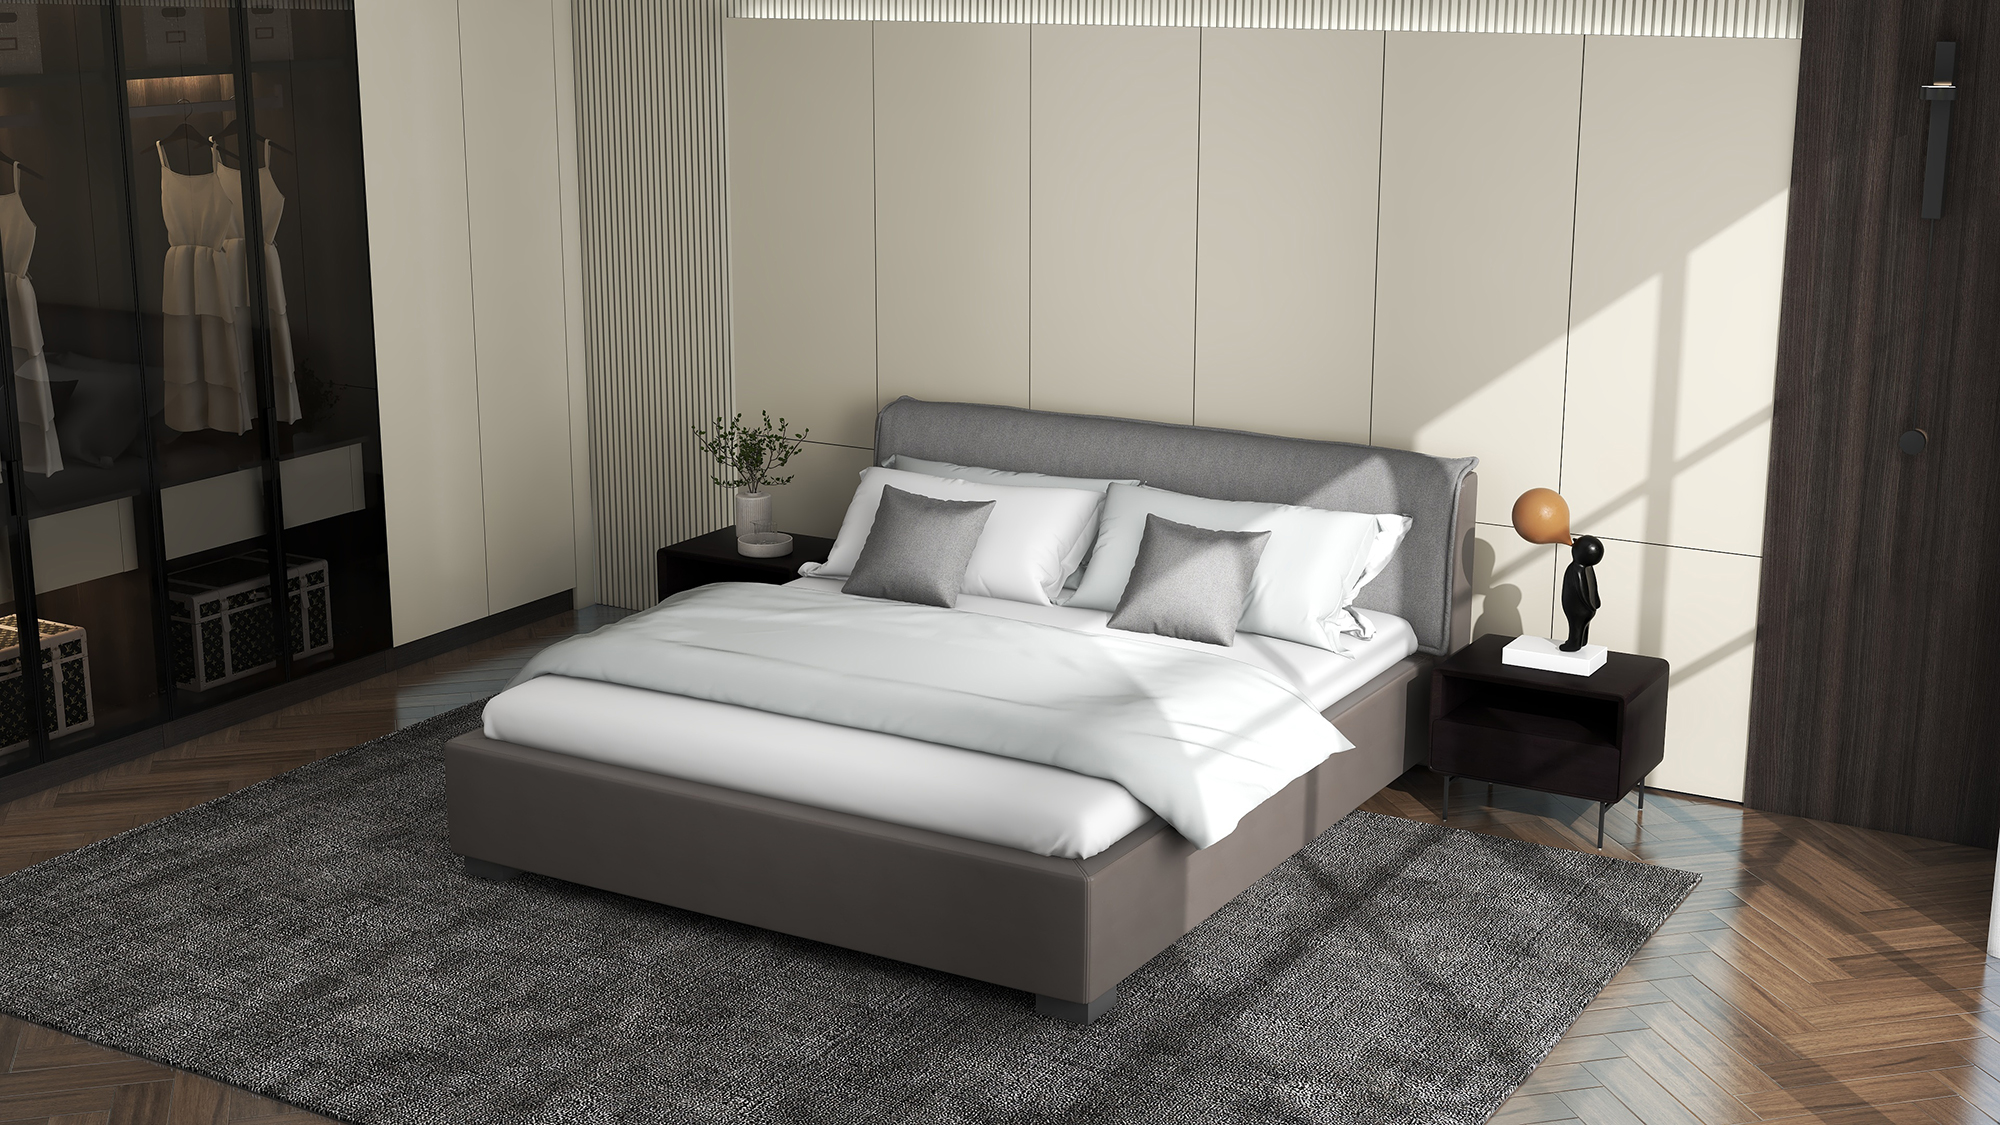 <p><strong>description：</strong></p><p>*bedframe with the 3D slats or motion</p><p>*leather feeling fabric, easy to clean</p><p>*Typical European style. &nbsp;</p><p>*Well matched the mattress and bedding.</p><p><br/></p>